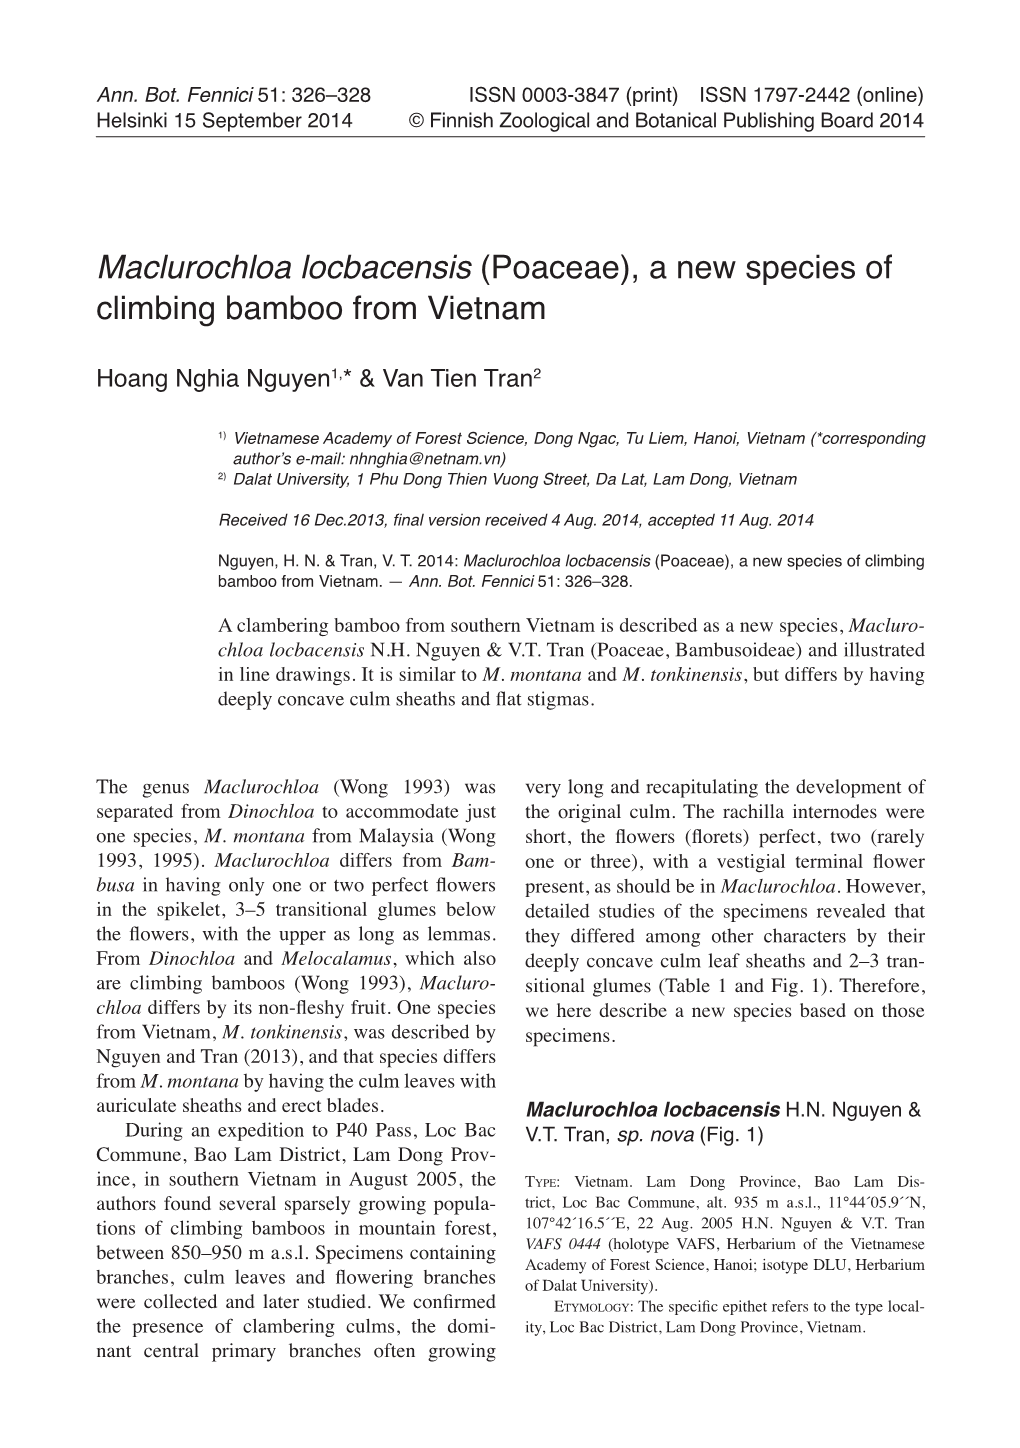 Maclurochloa Locbacensis (Poaceae), a New Species of Climbing Bamboo from Vietnam